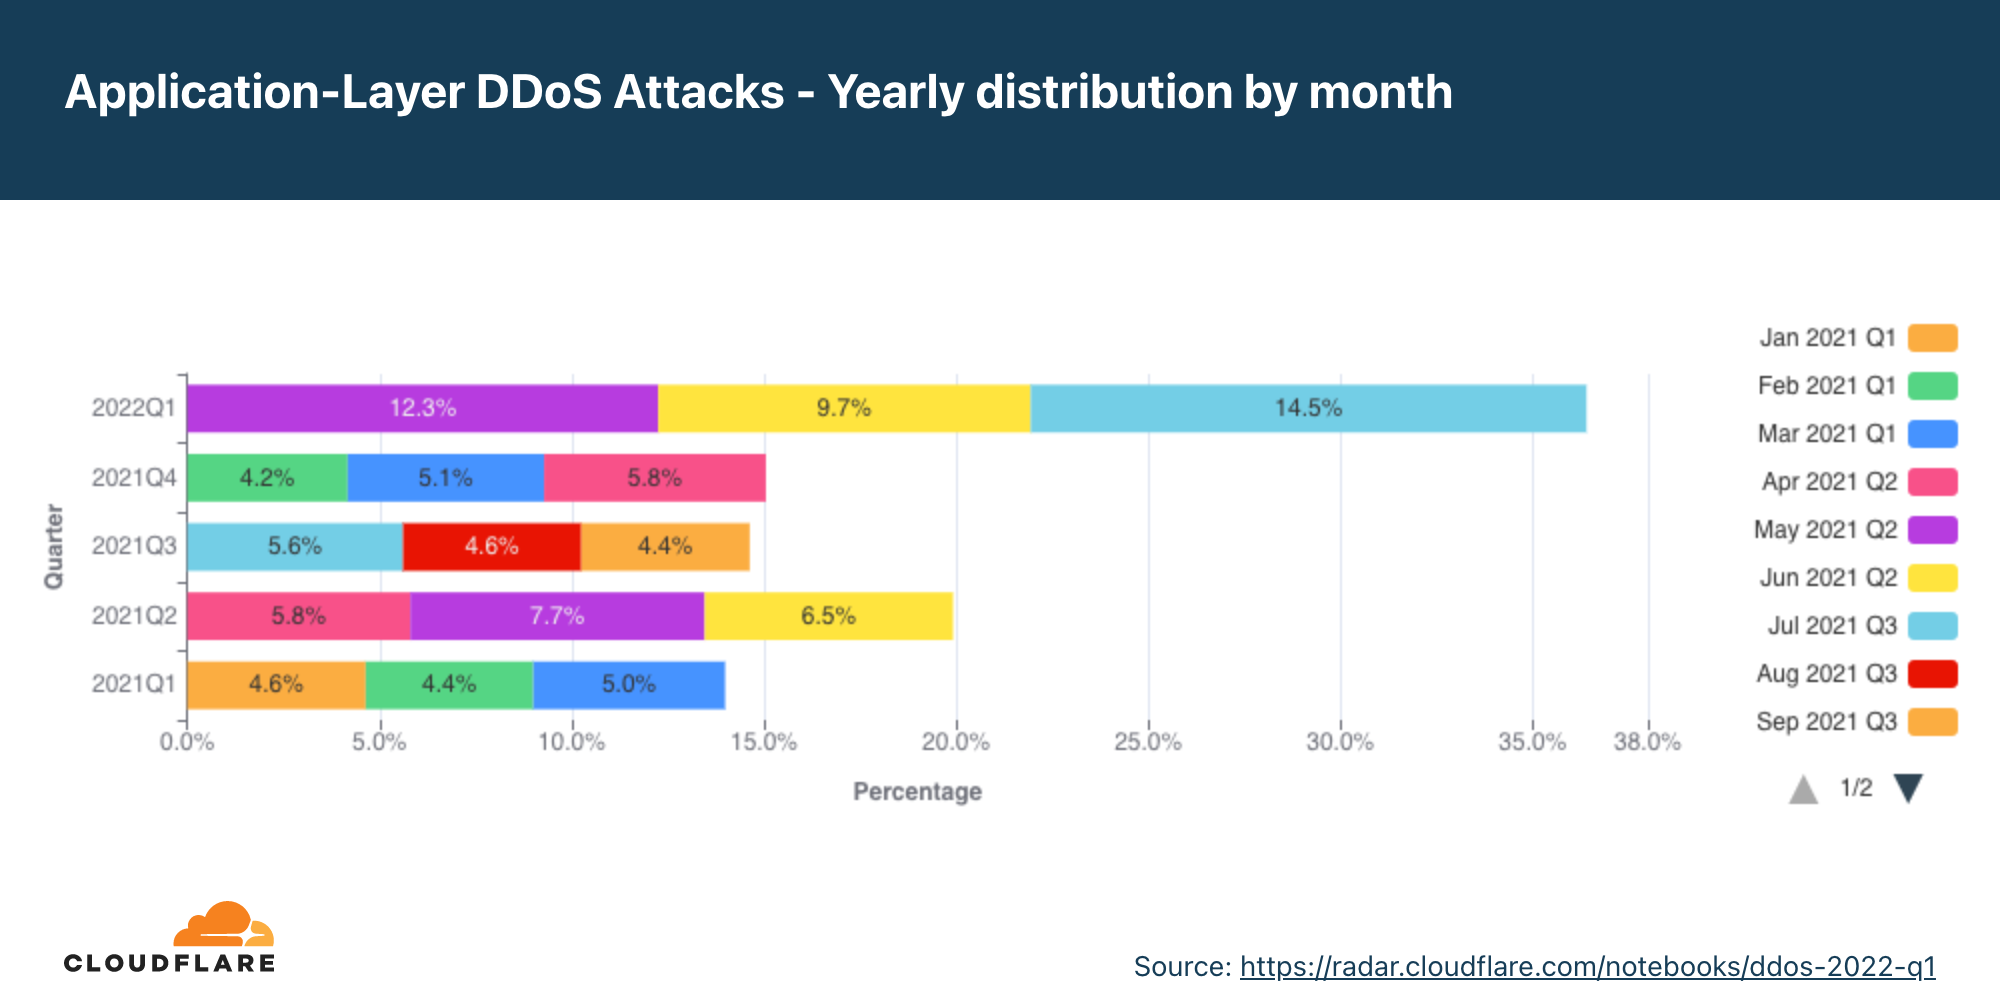 Graph of the yearly distribution of application-layer DDoS attacks by month in the past 12 months